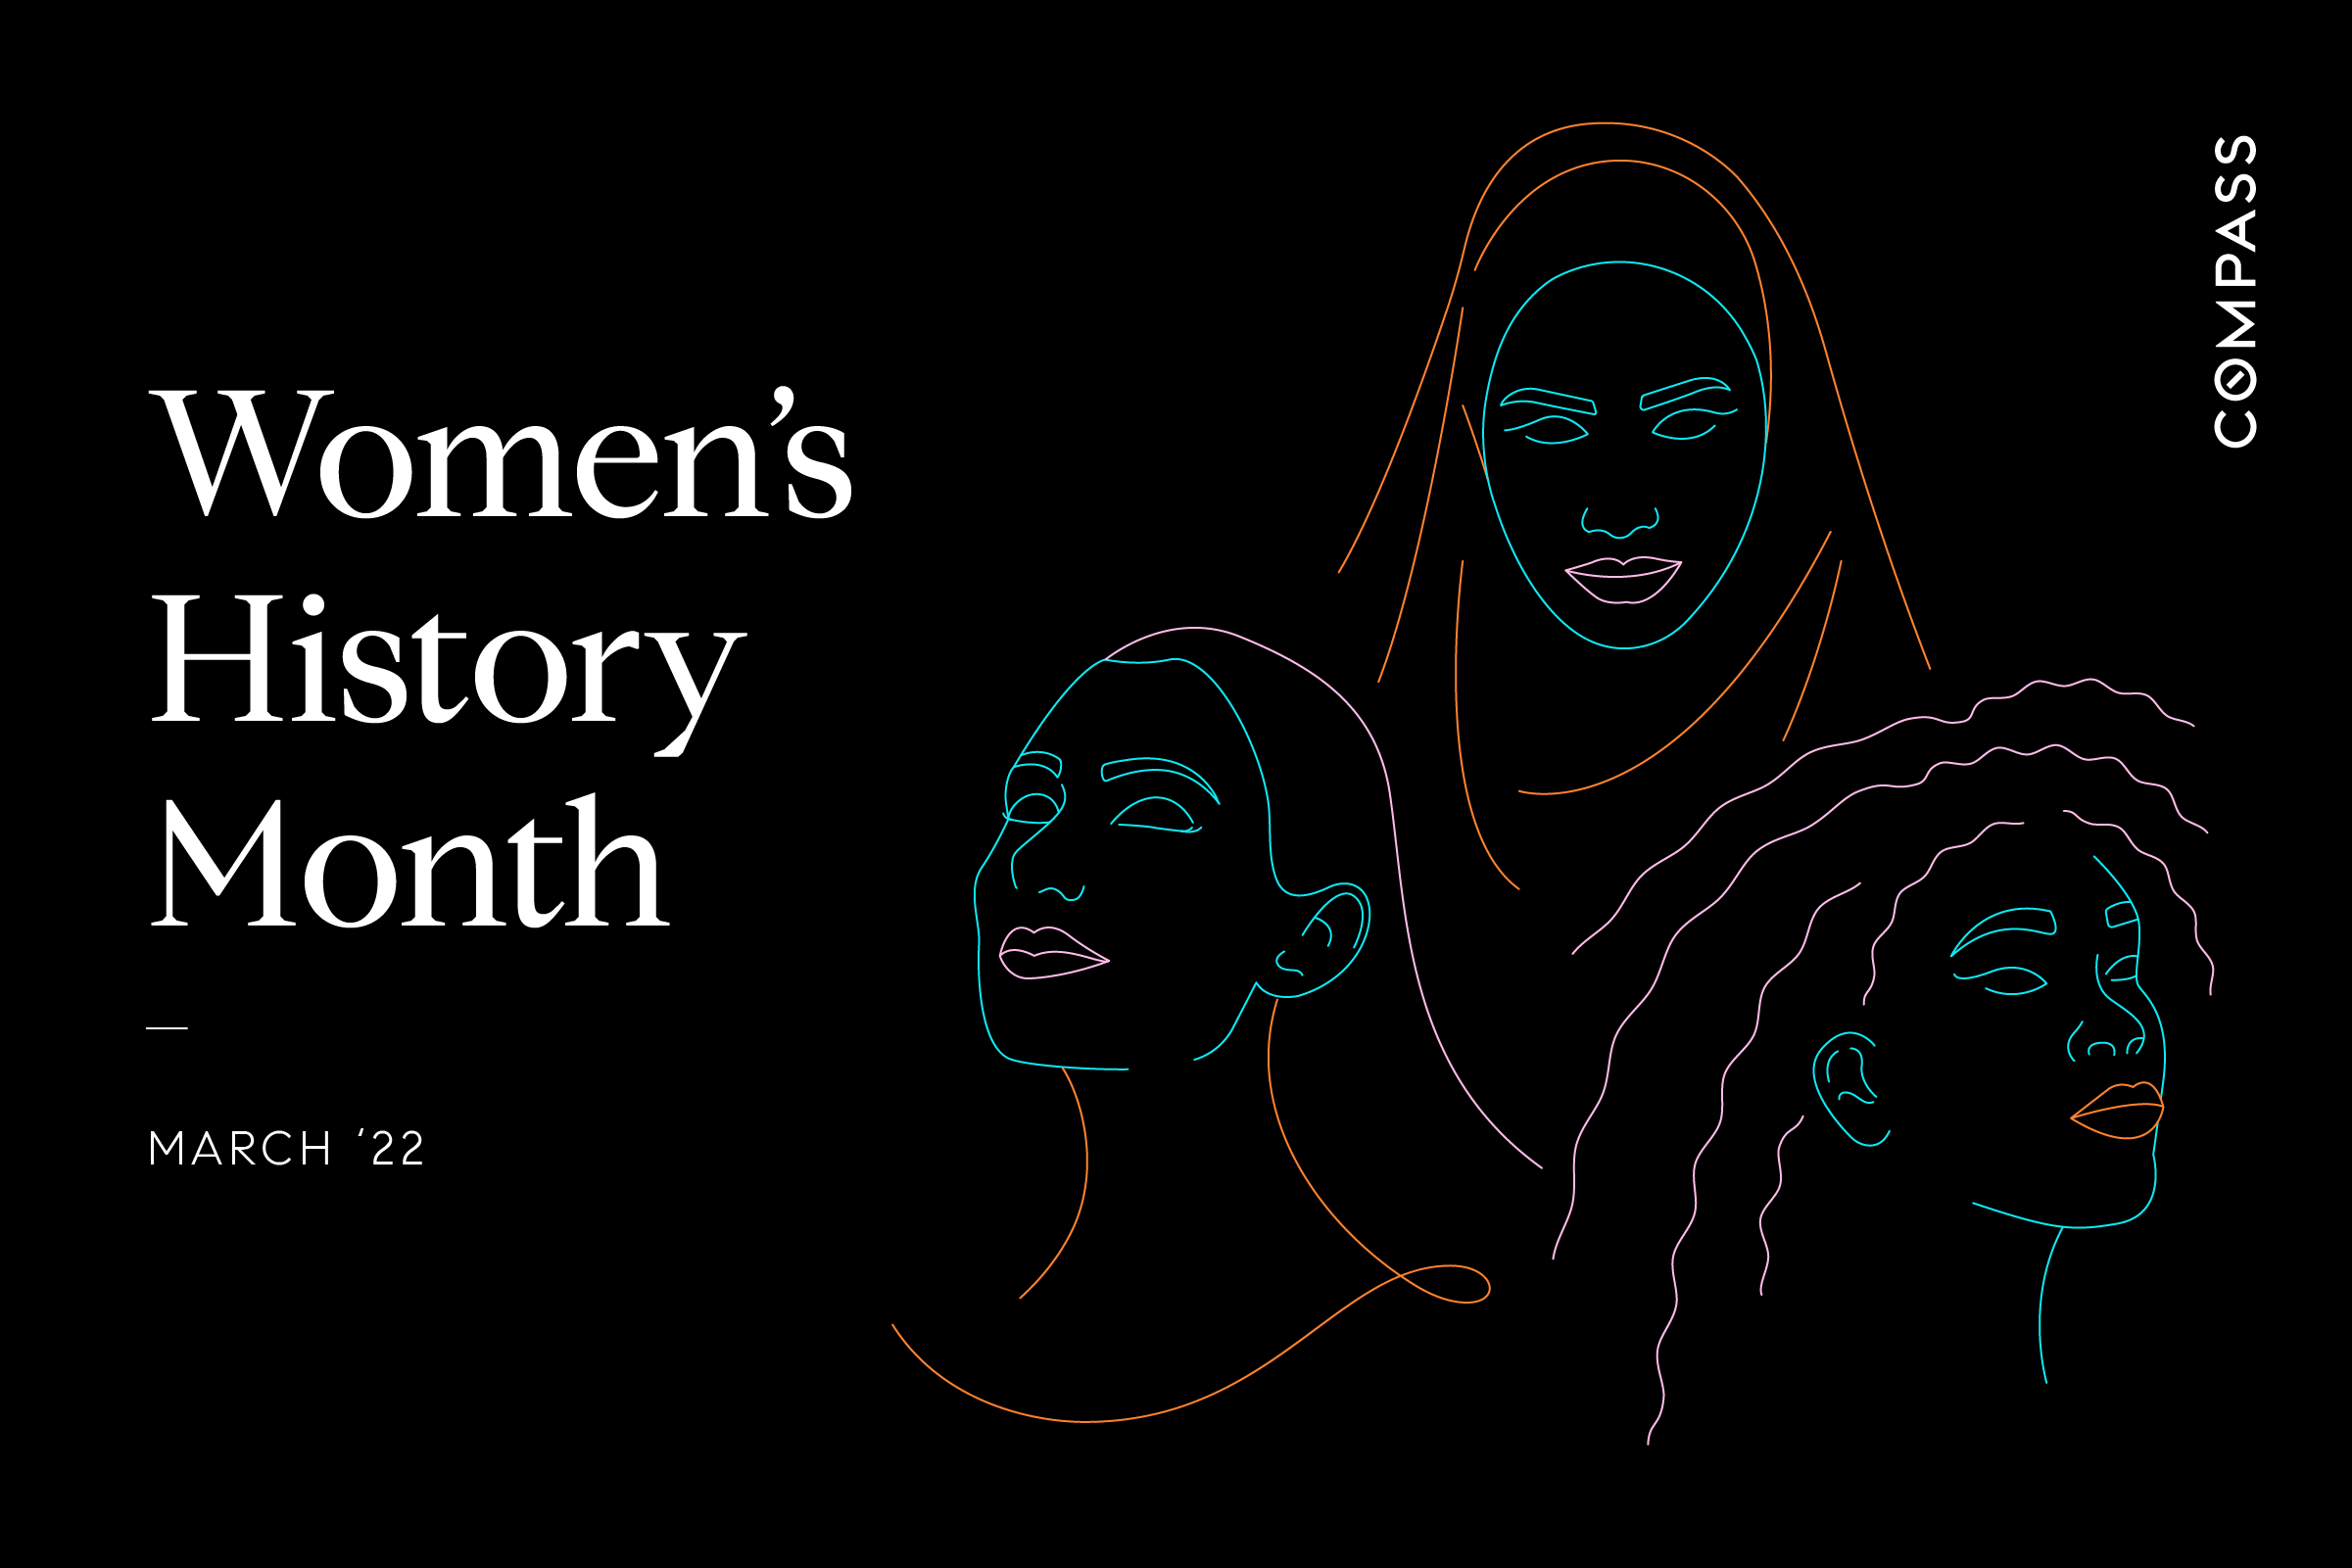 "women's History month" Black background with line drawings of women